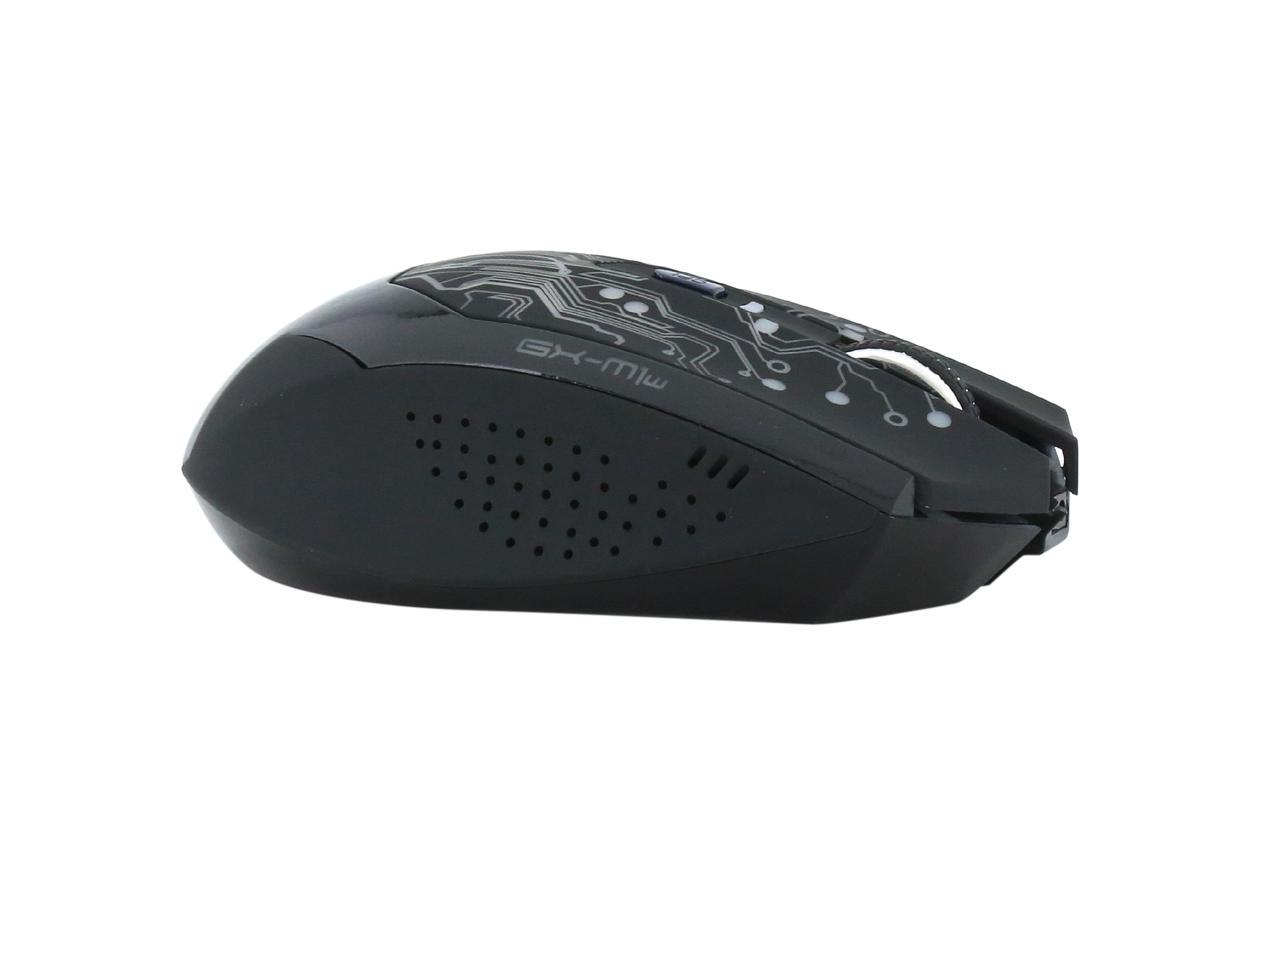 microsoft wireless mouse 3500 use rechargeable battery